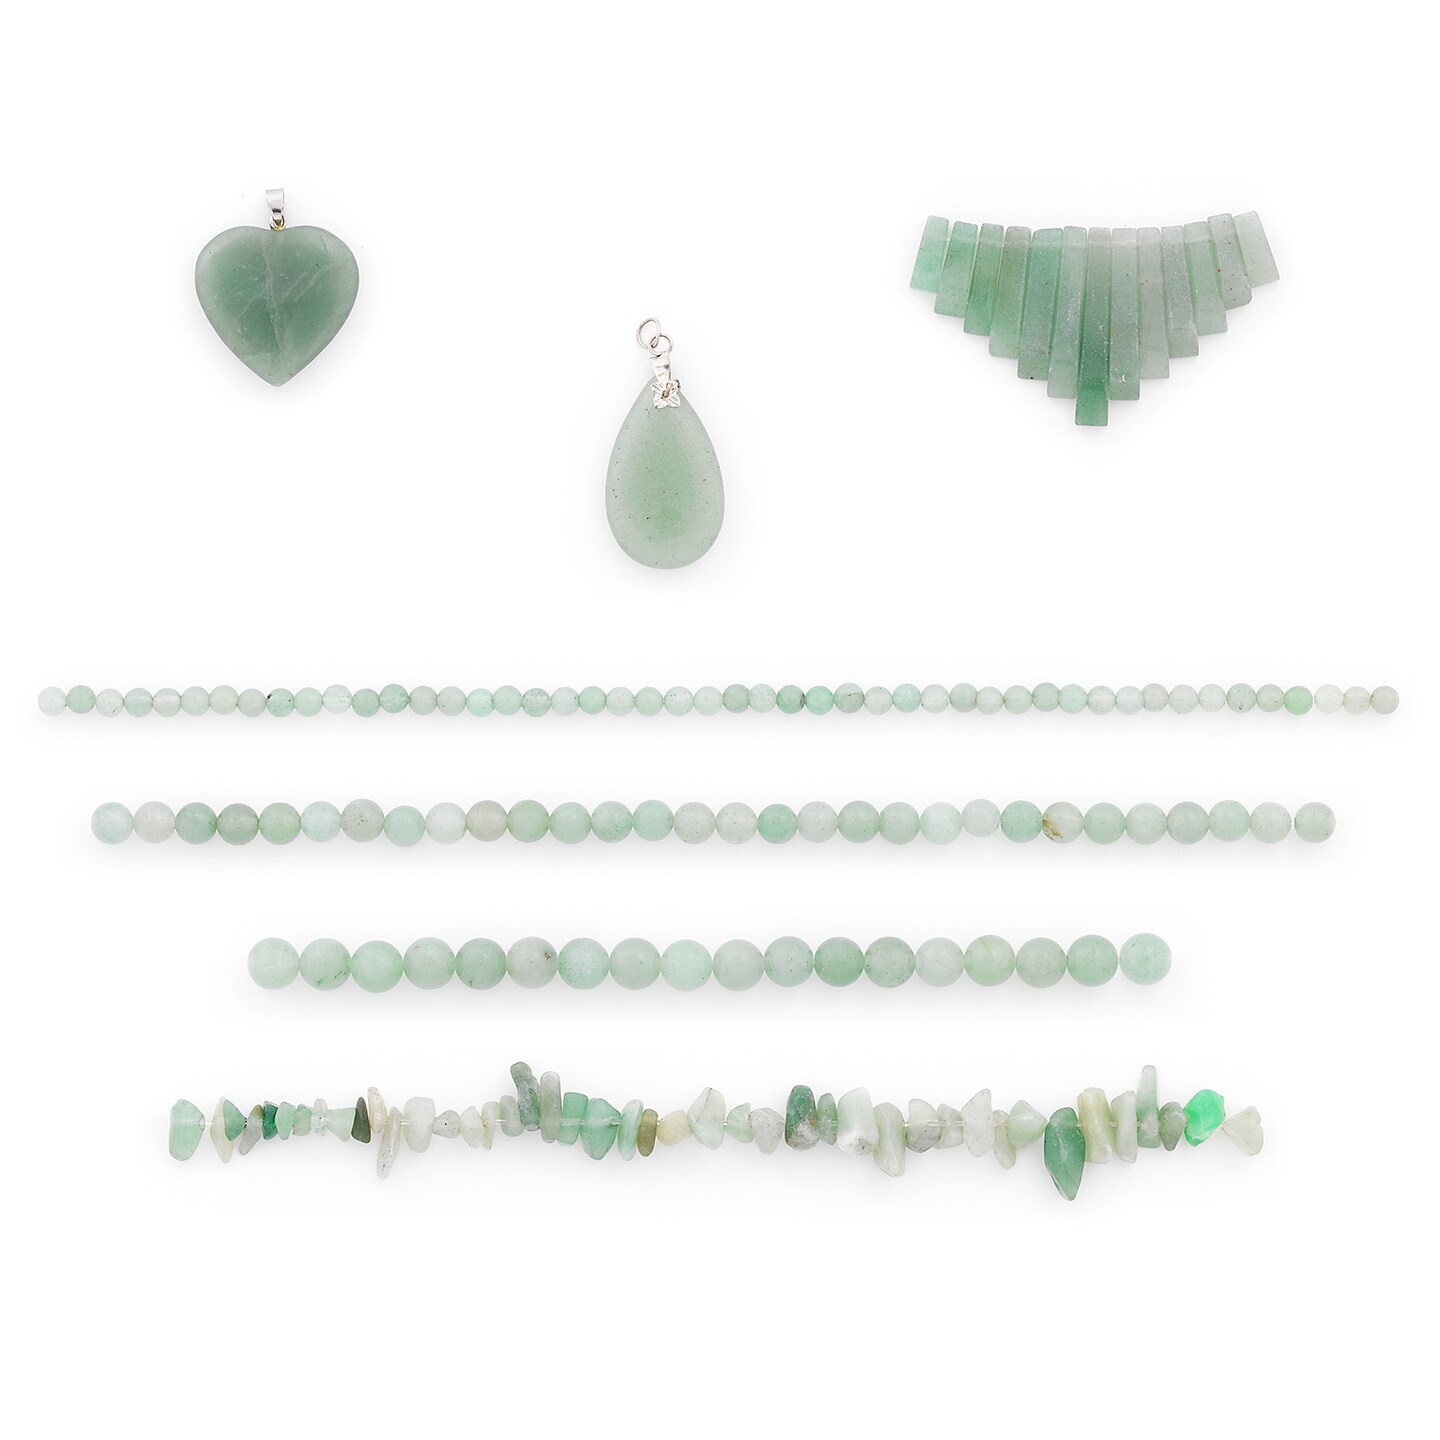 Green Aventurine Natural Gemstone Beads and Pendant Collection